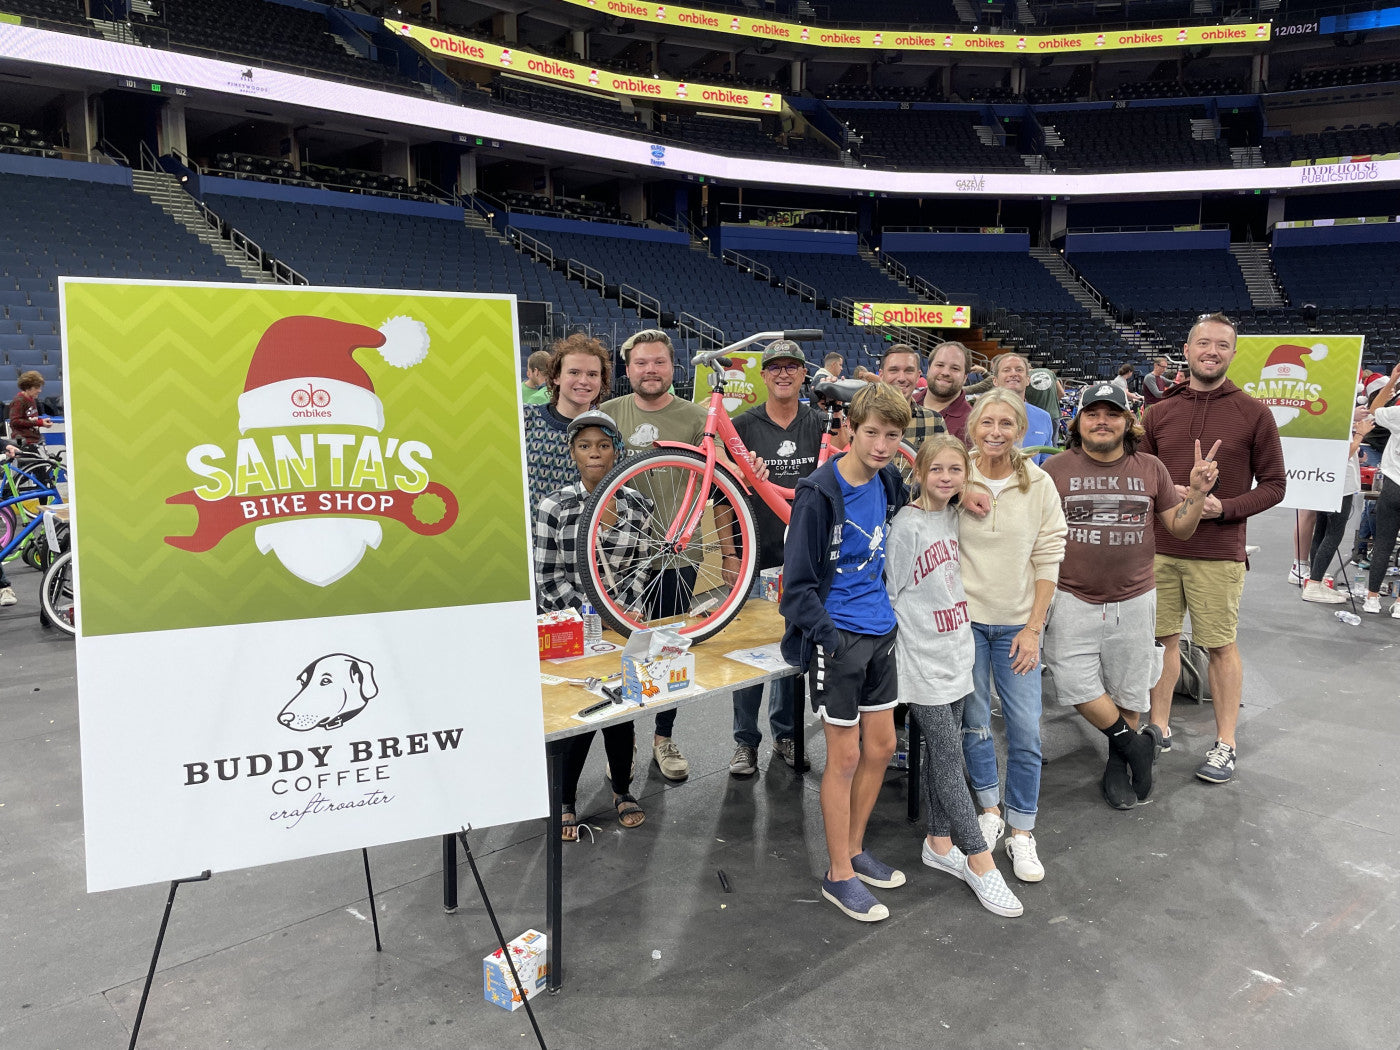 Buddy Brew supports onbikes during the holidays